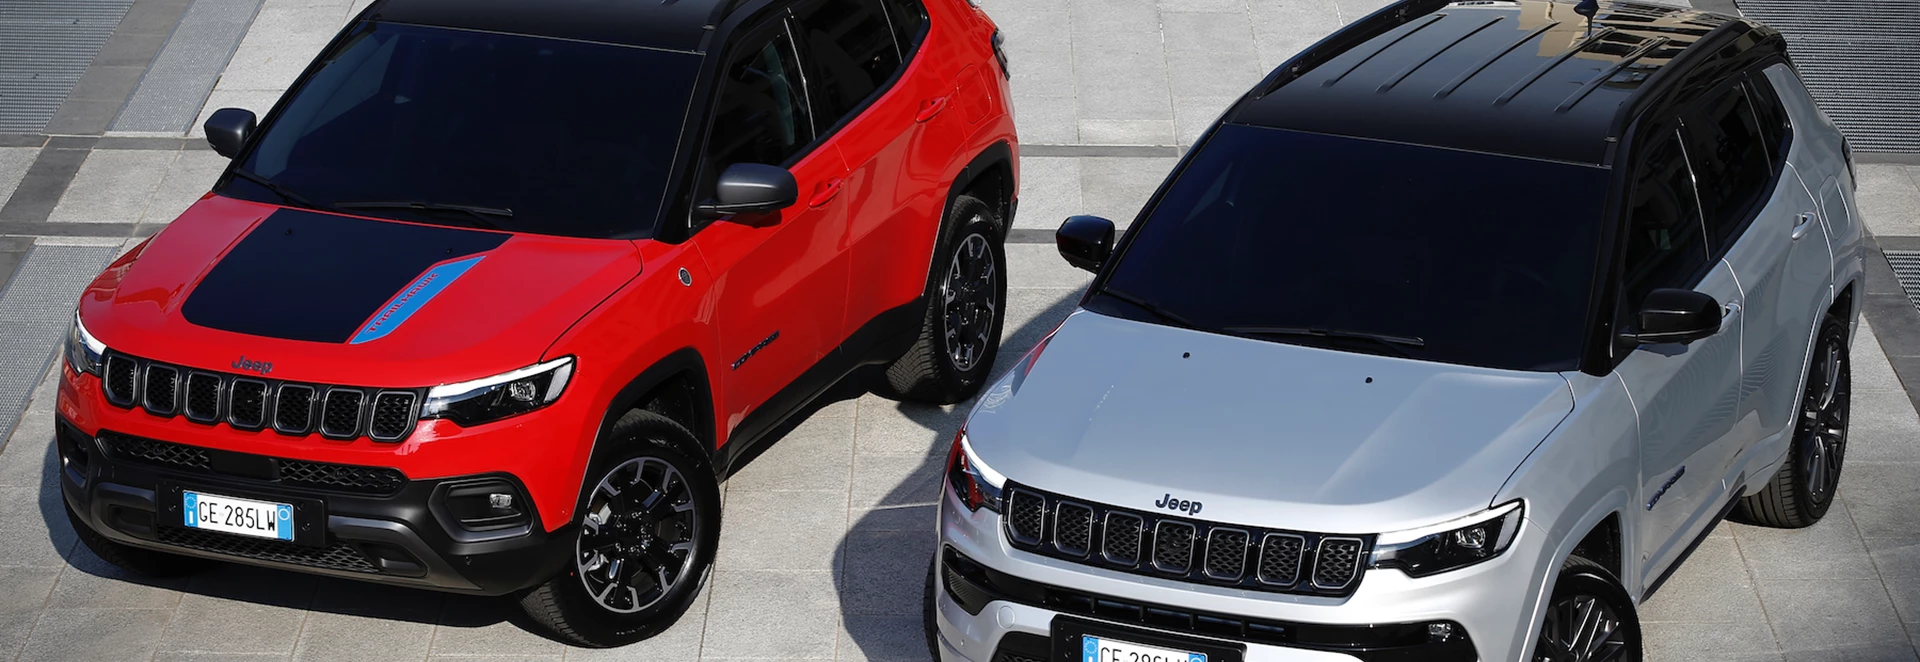 Facelifted Jeep Compass revealed with new technology and semi-autonomous driver capability 